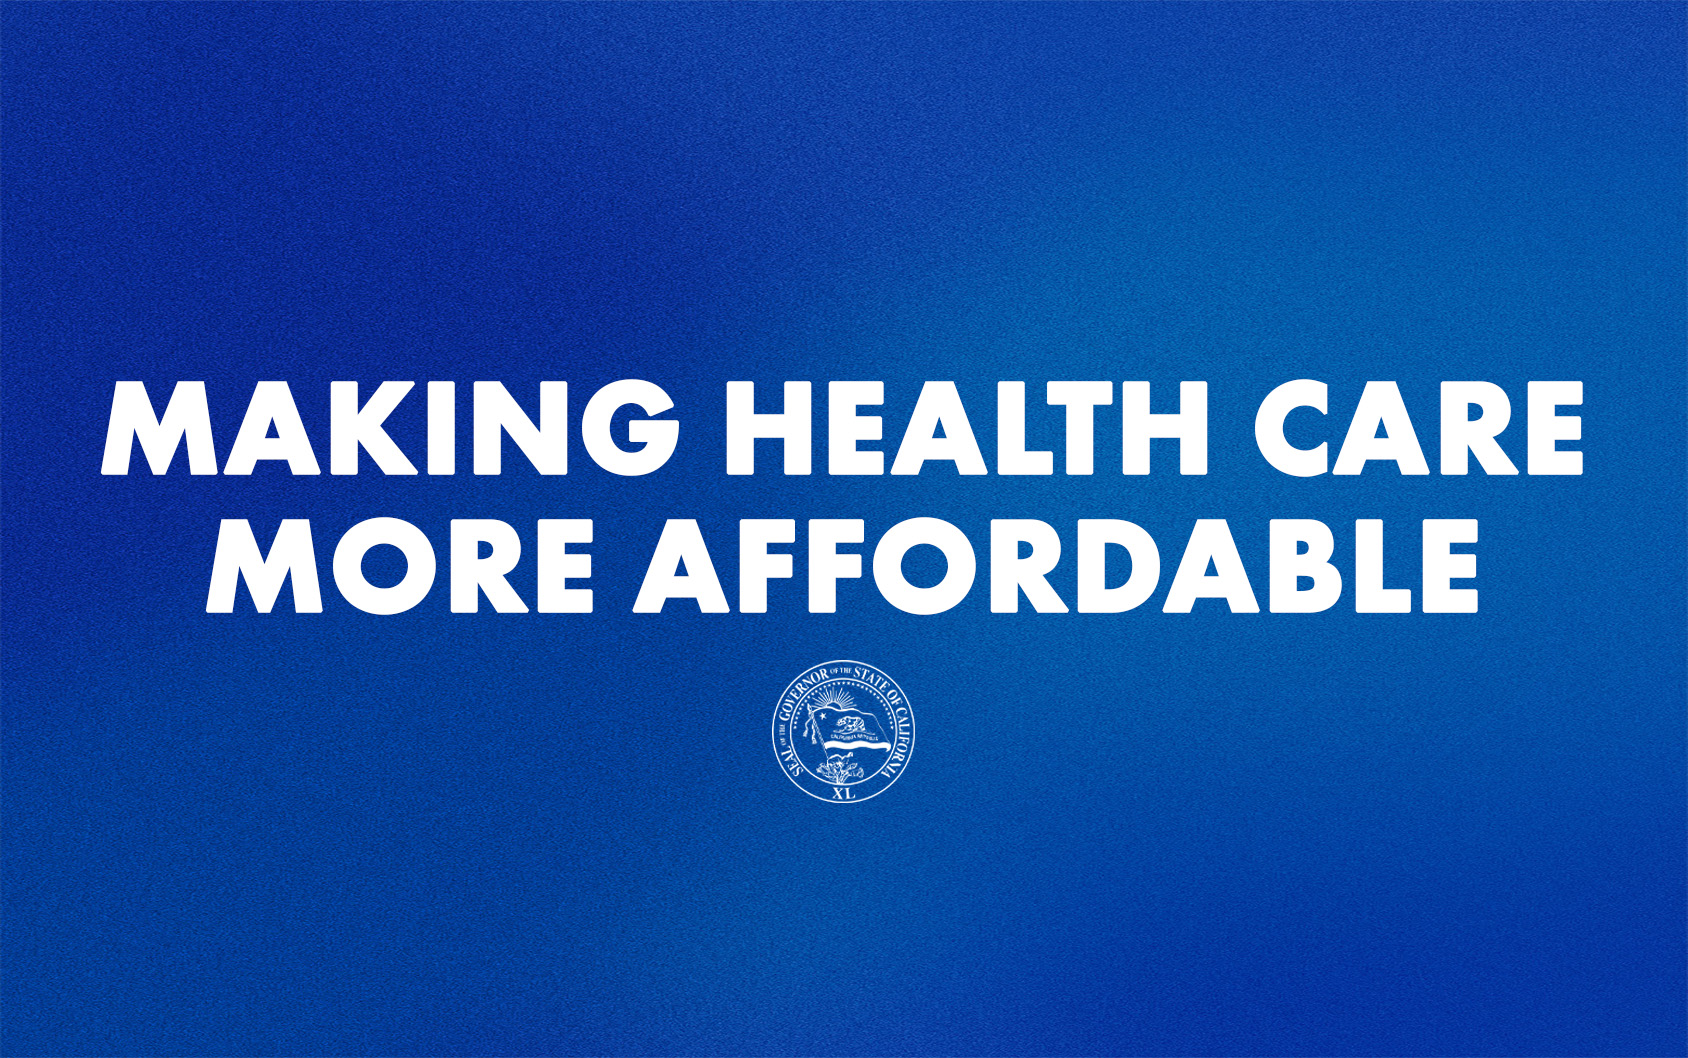 ICYMI: The Newsom Administration Takes Action to Control Rising Health Care Costs